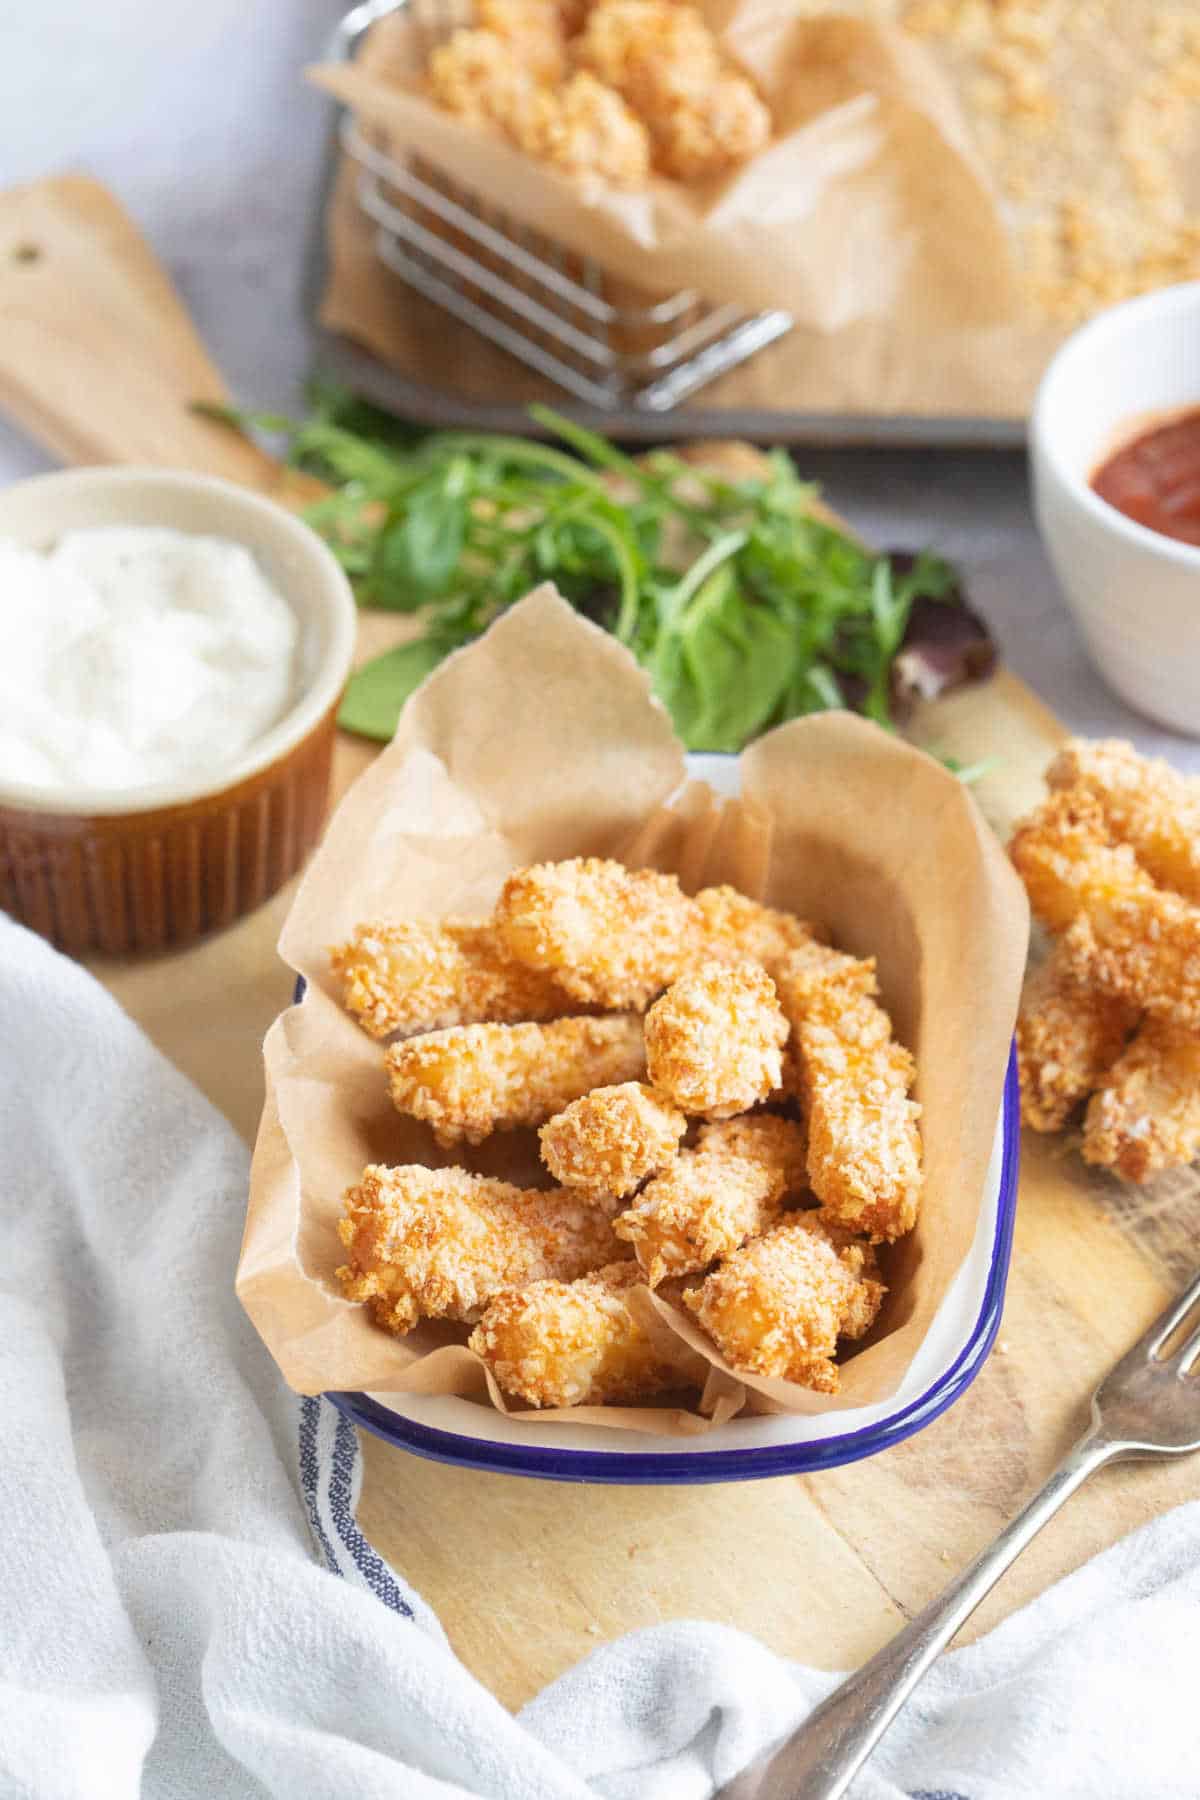 Halloumi fries with dips.